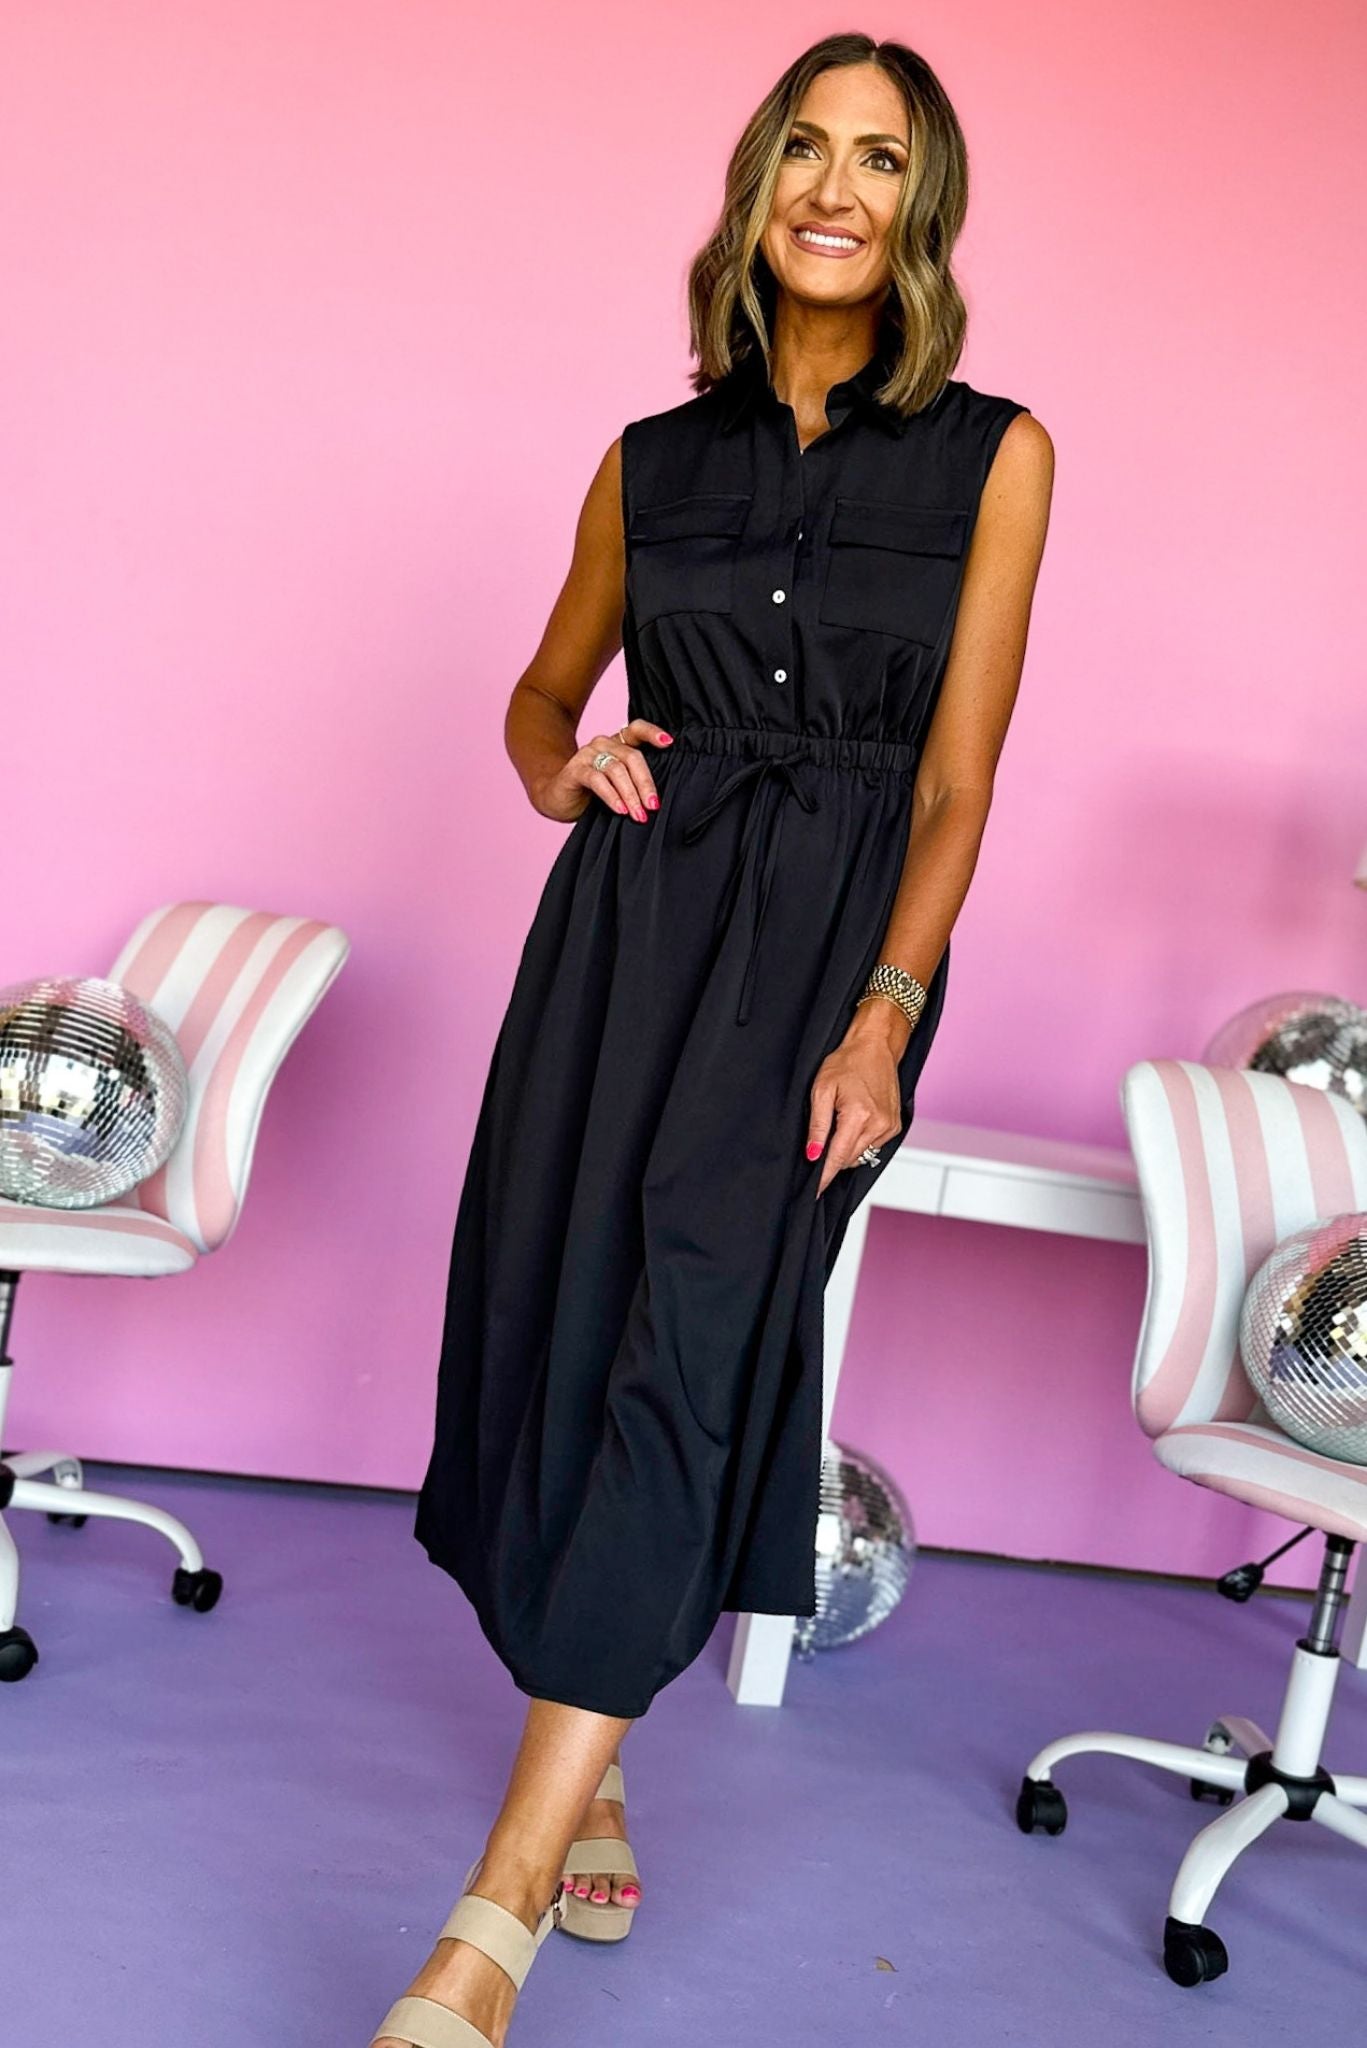 Load image into Gallery viewer, Black Button Down Drawstring Waist Sleeveless Midi Dress, mom chic, carpool chic, elevated style, mom style, transition piece, must have dress, mom dress, shop style your senses by mallory fitzsimmons
